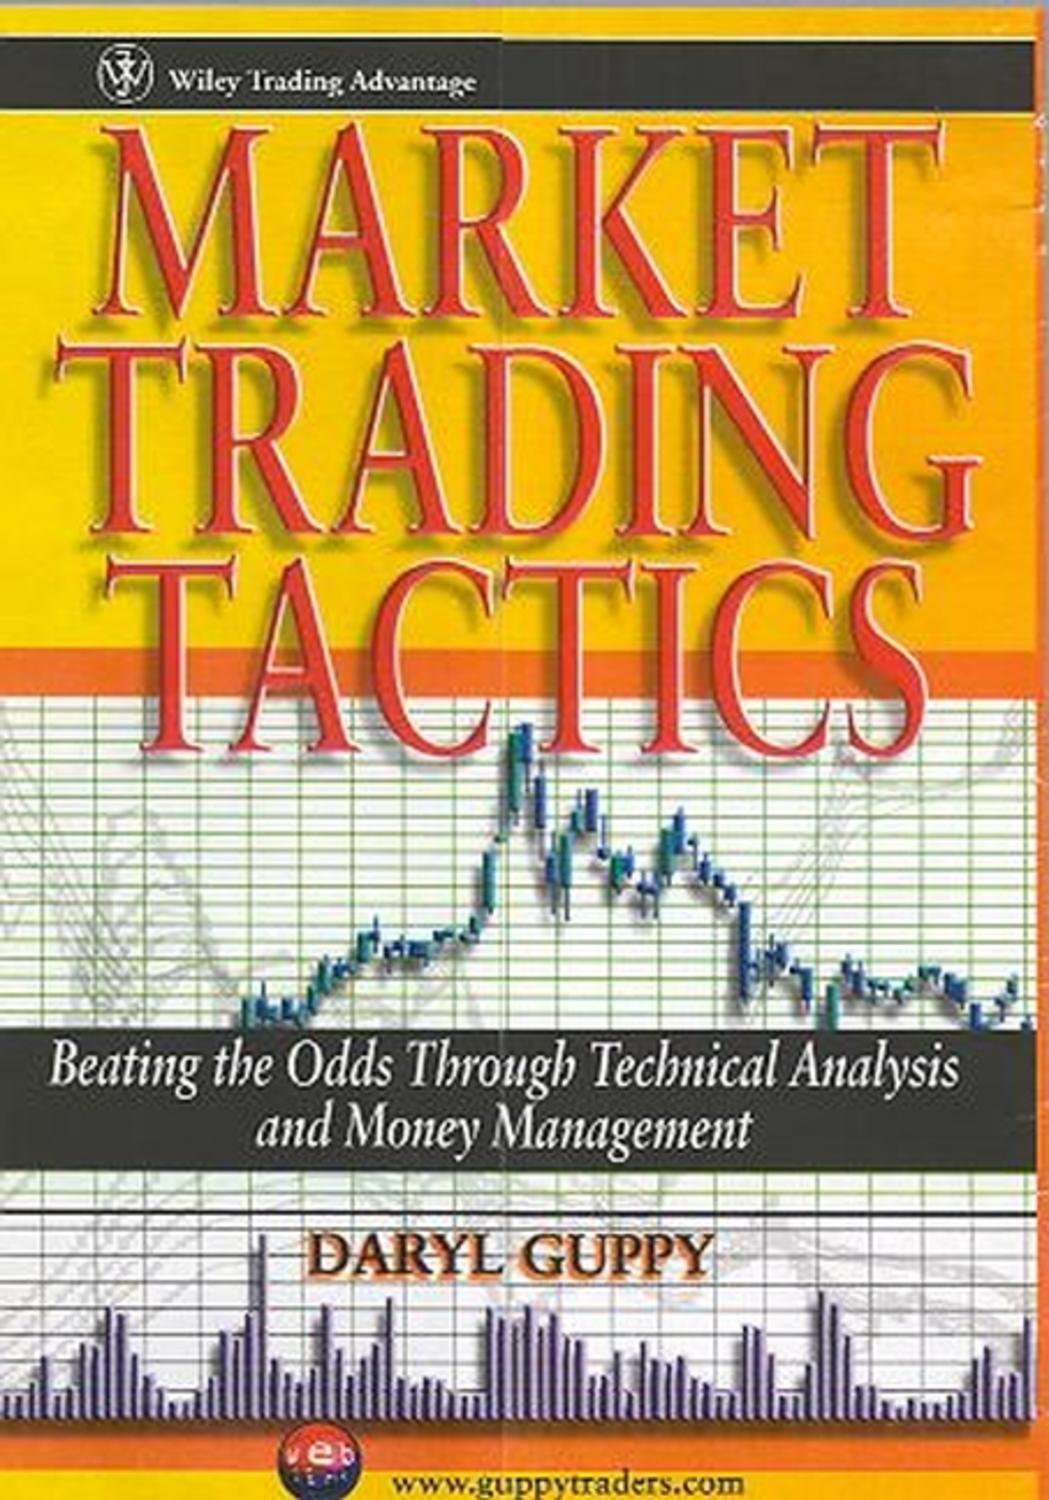 Daryl Guppy - Market Trading Tactics - Beating the Odds through Technical Analysis and Money Management